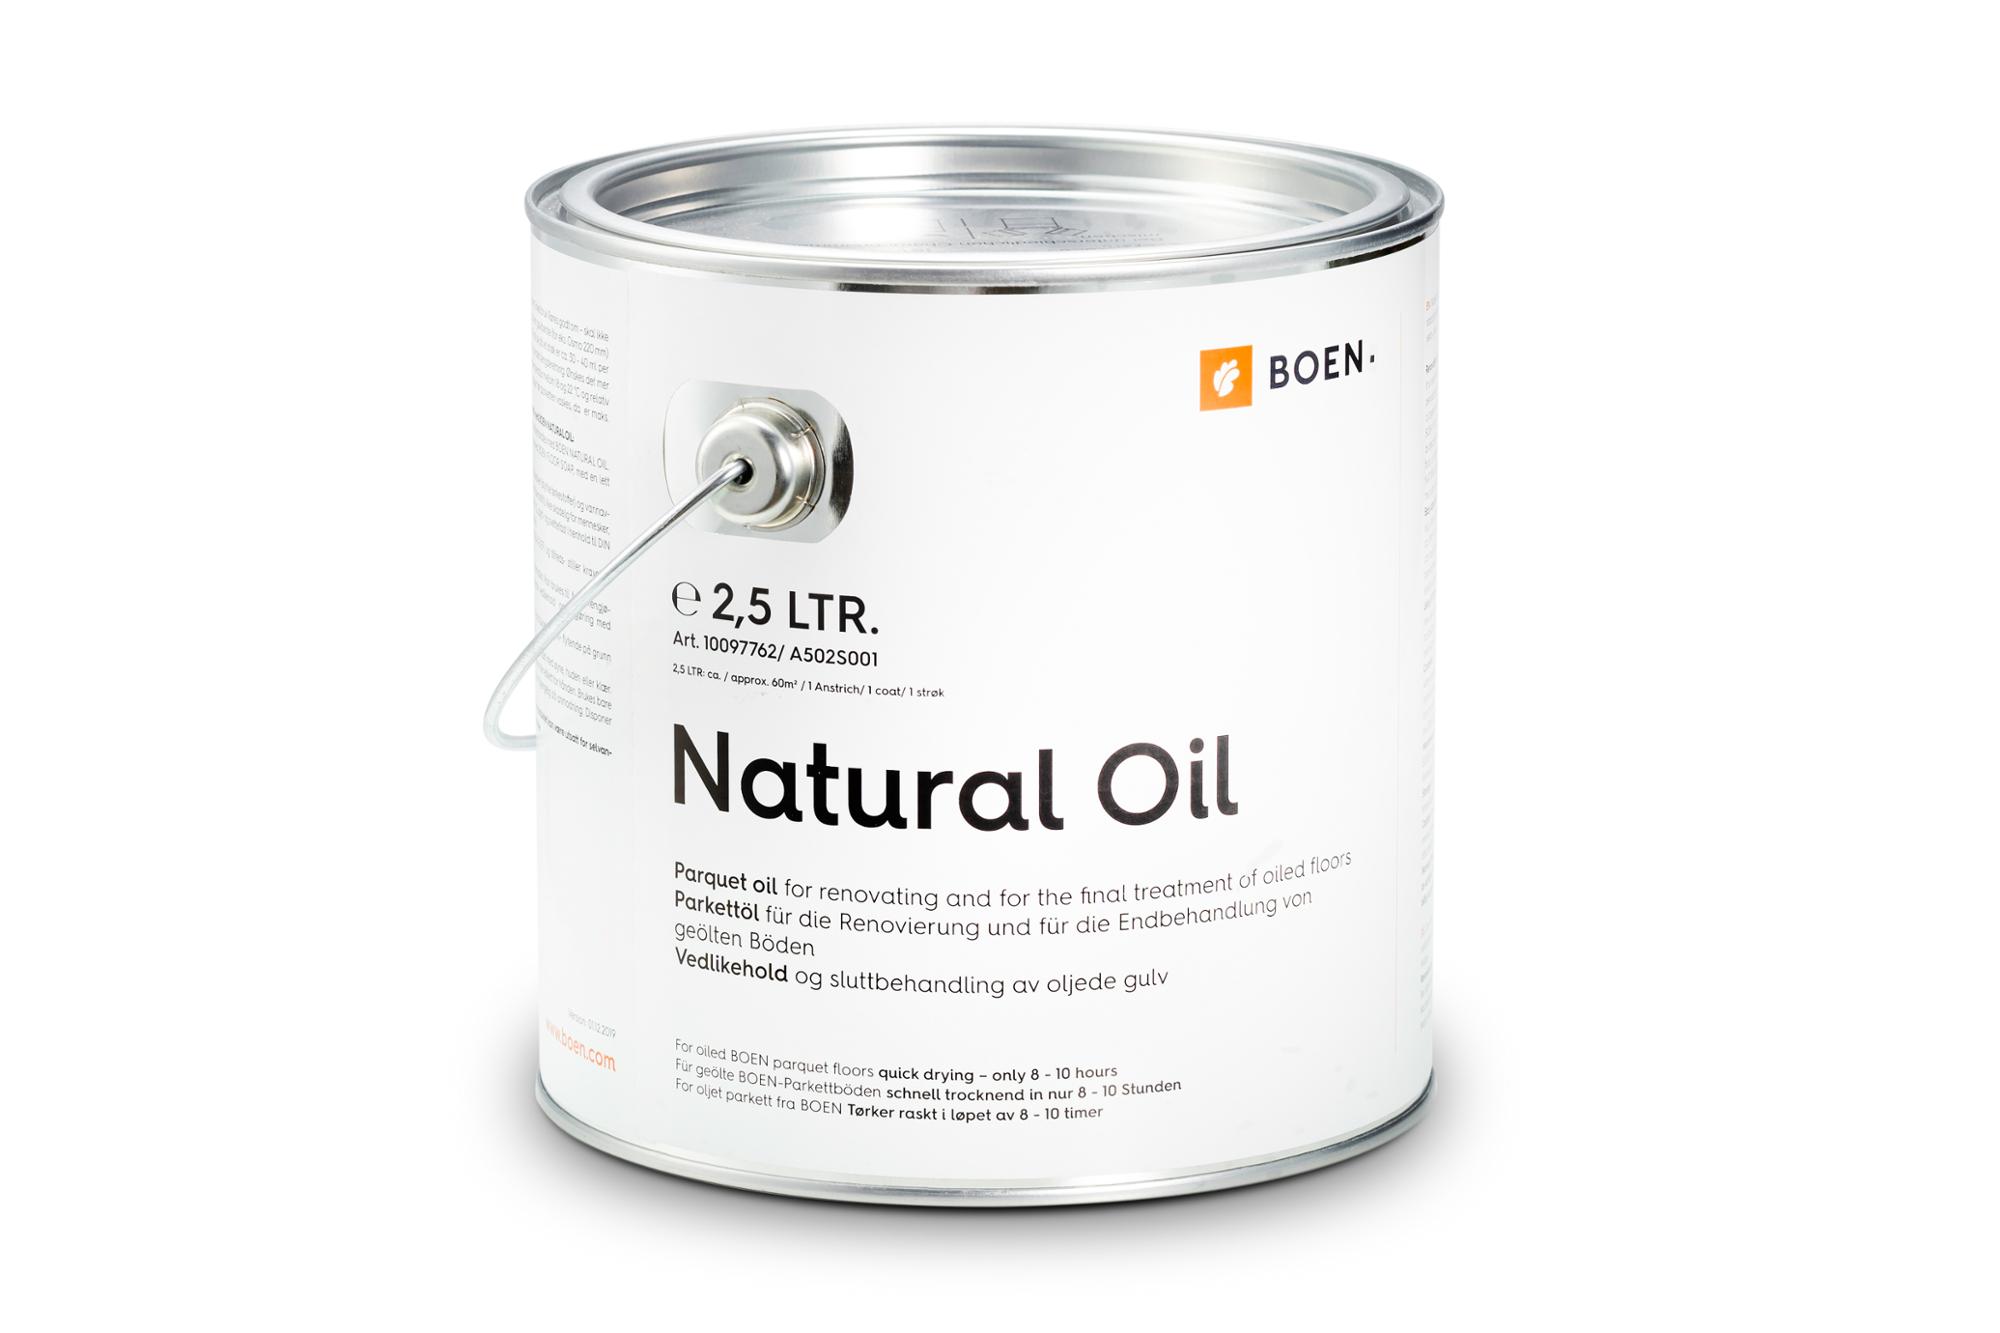 BOEN Natural Oil transparent 2,5l

For finishing of sanded
or untreated wooden surfaces.
1 litre for approx. 24m²